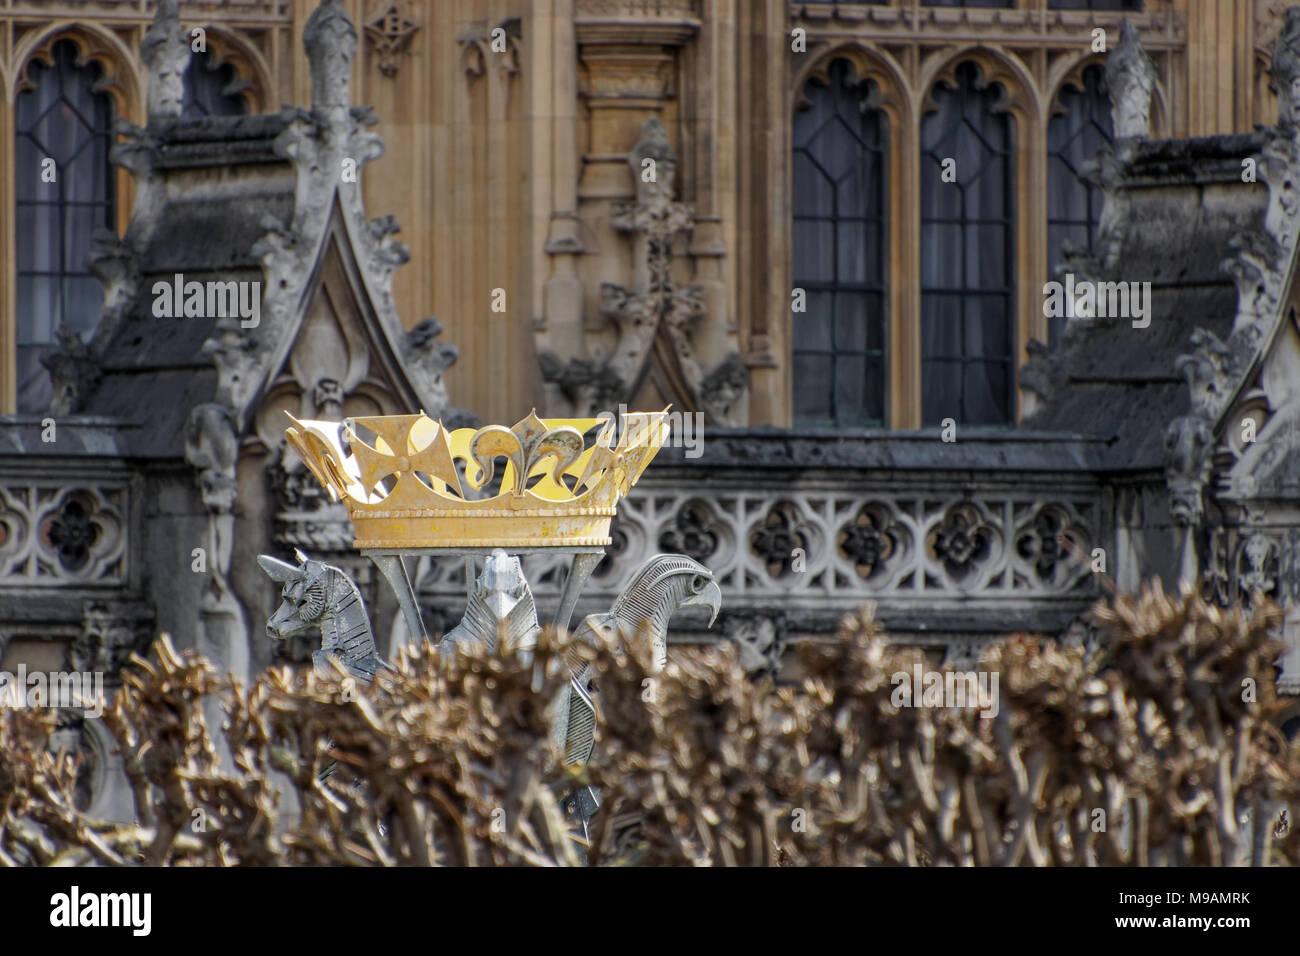 LONDON/UK - MARCH 21 : Crown in the Grounds of the Houses of Parliament in London on March 21, 2018 Stock Photo